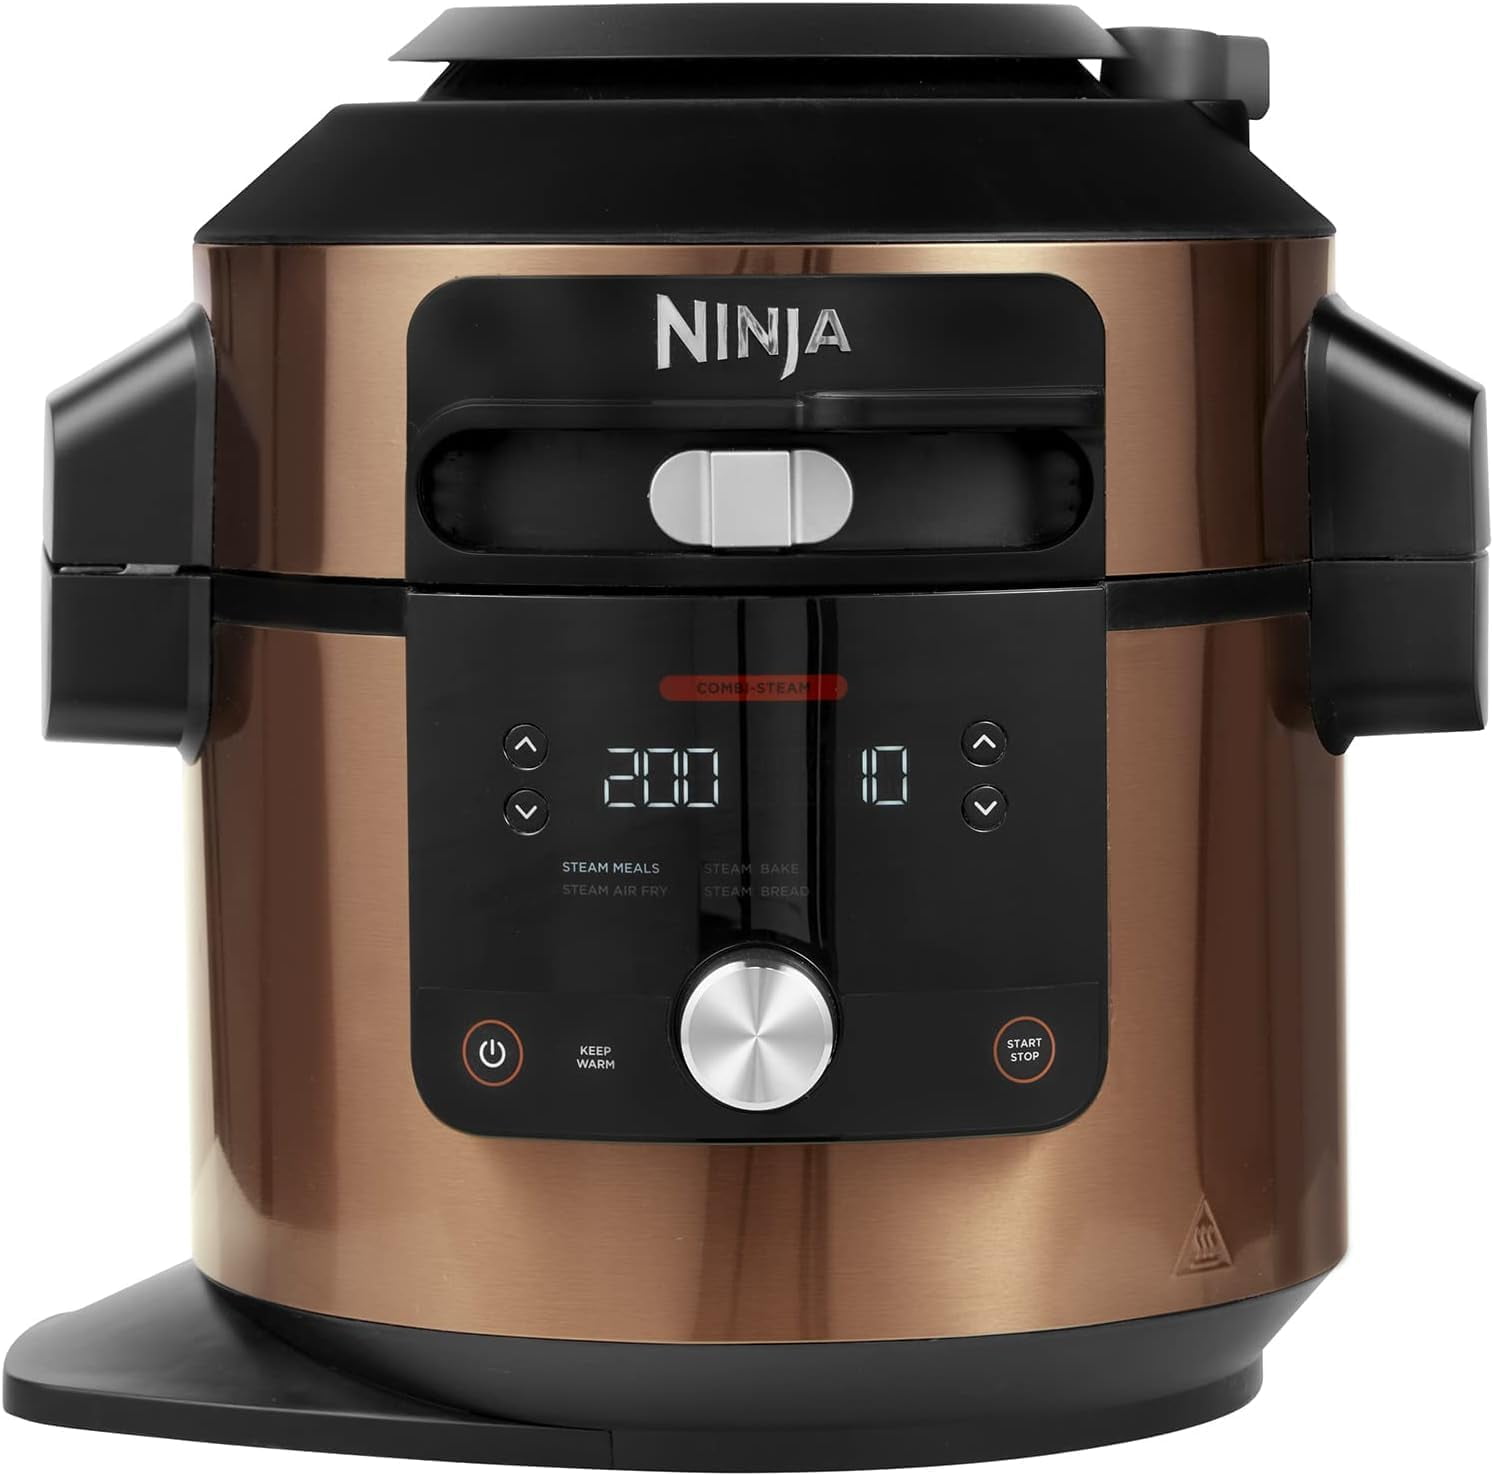 Obsessed is an understatement with this new Ninja Foodi Xl Pressure Cooker  Steam Fryer with SmartLid! It has 3 cooking modes with 14…